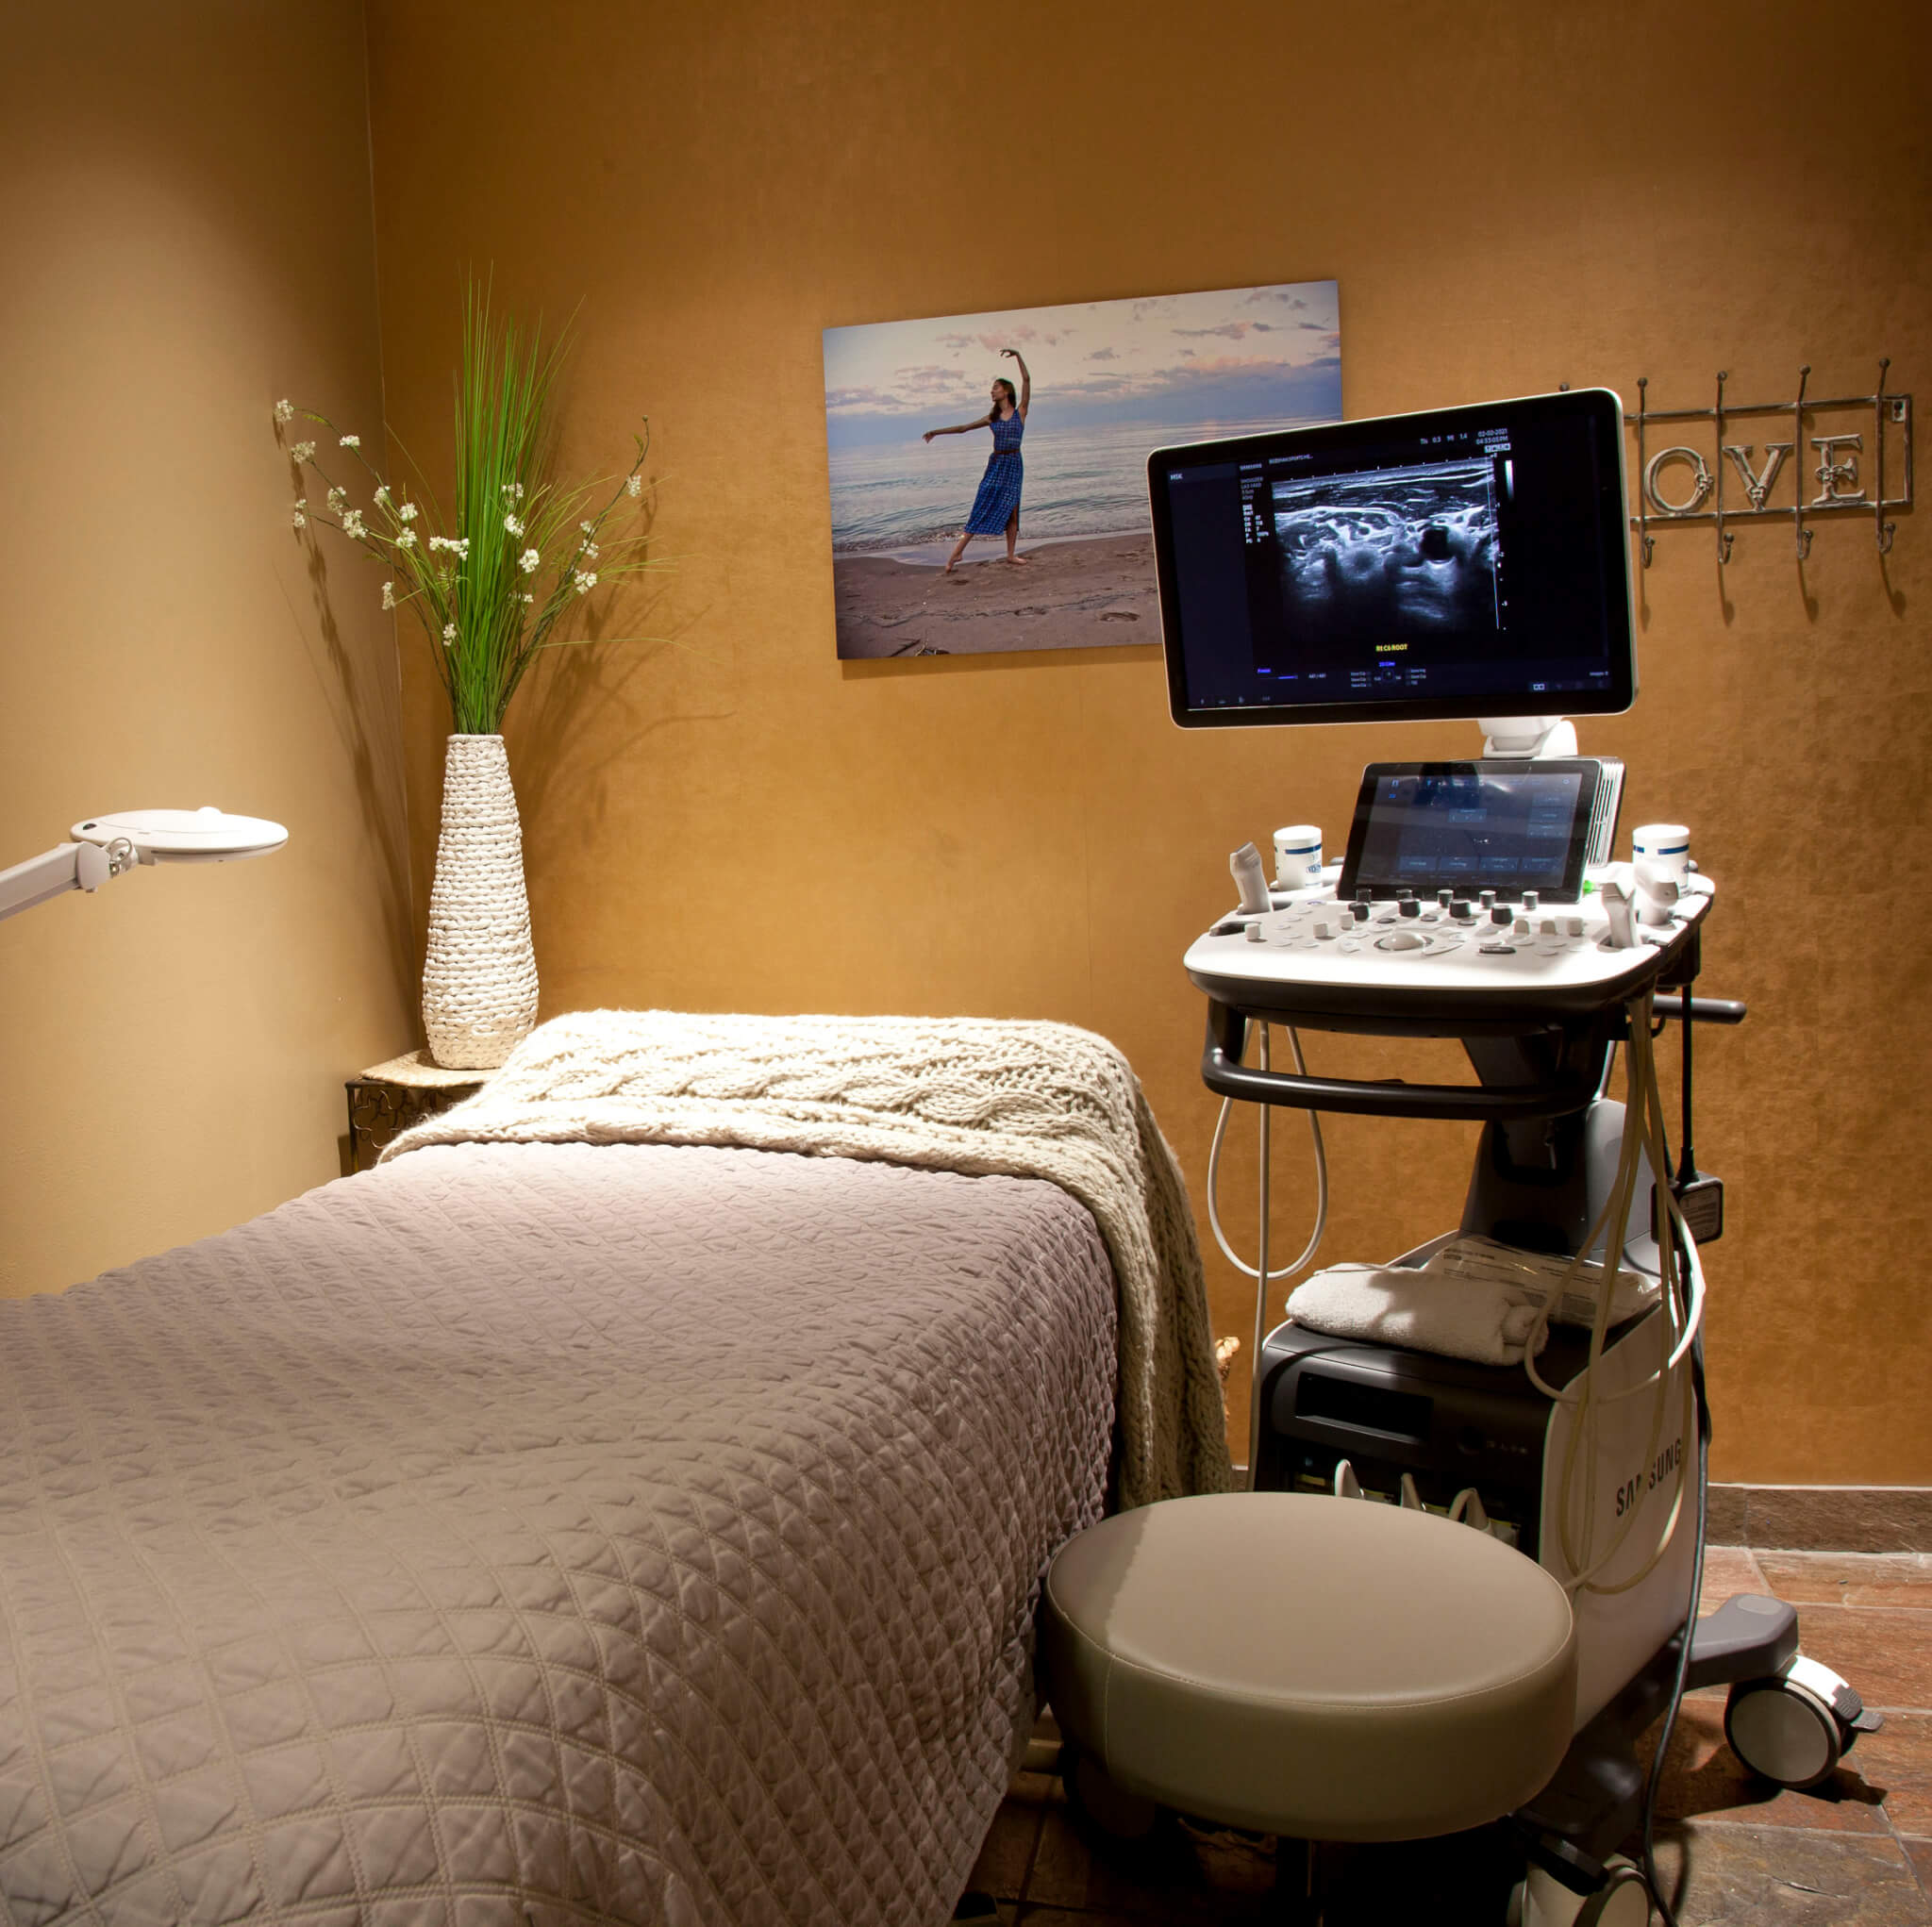 Exam room 2 at Bozeman Sports Medicine offers PRP injections